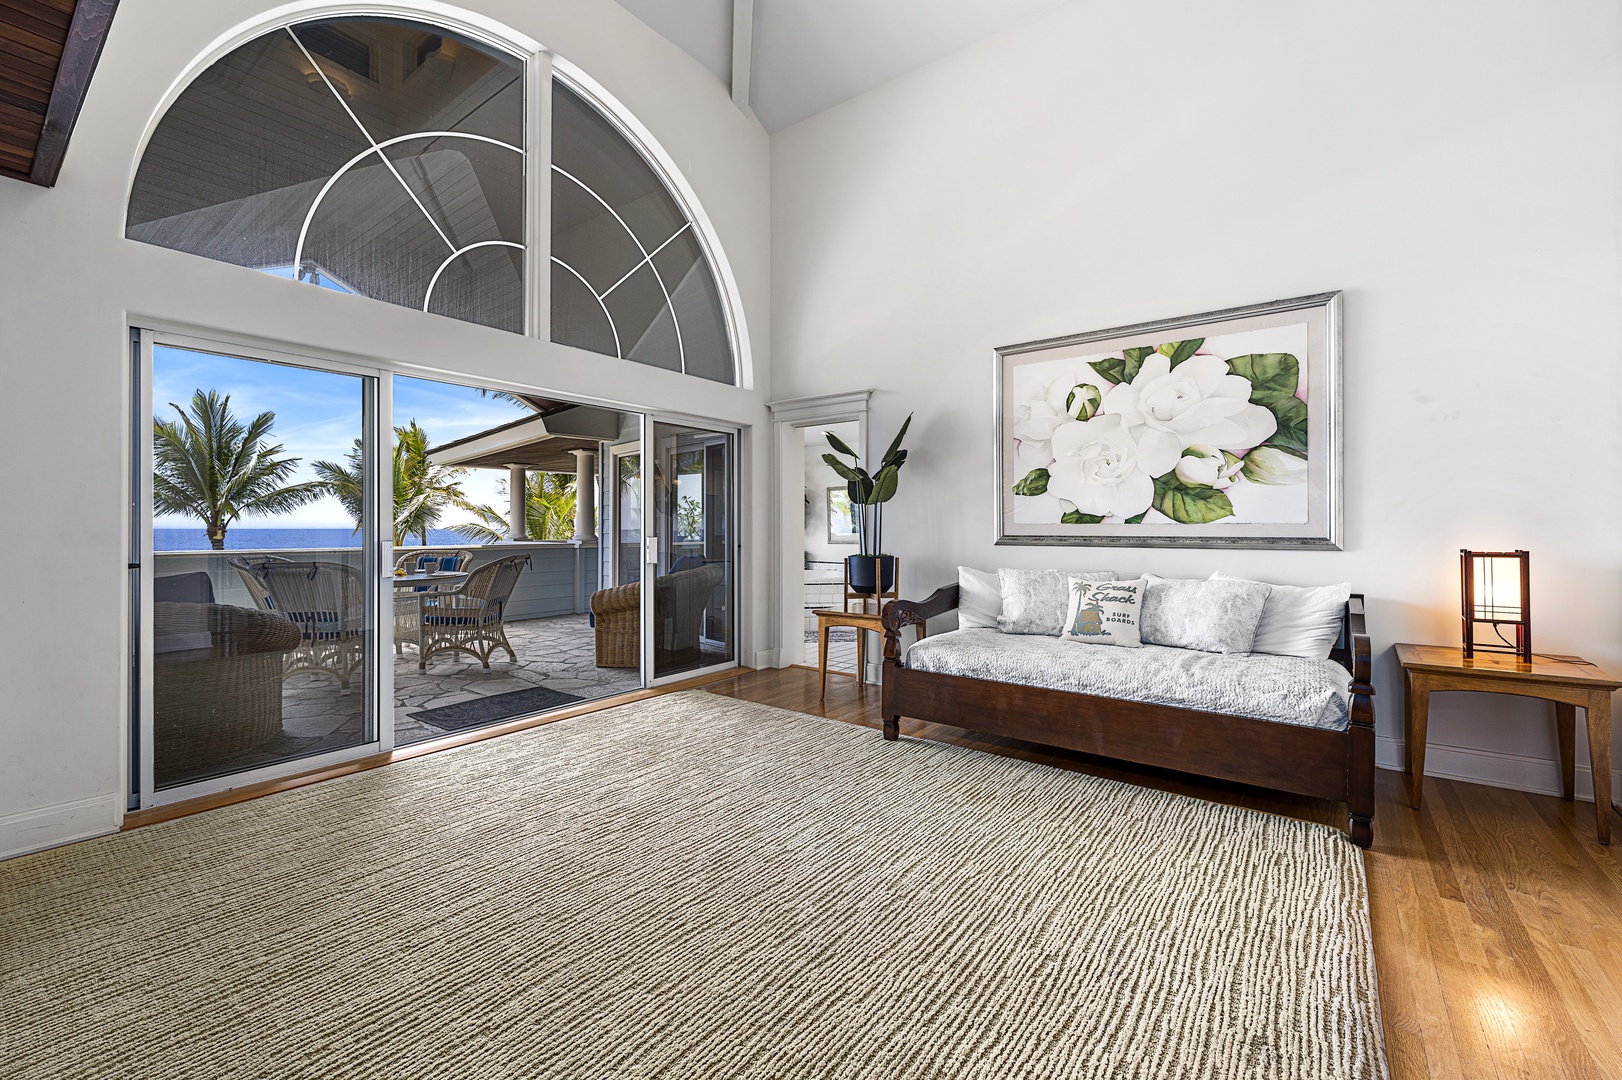 Kailua Kona Vacation Rentals, Kona Blue - Large vaulted ceilings with high windows for natural light